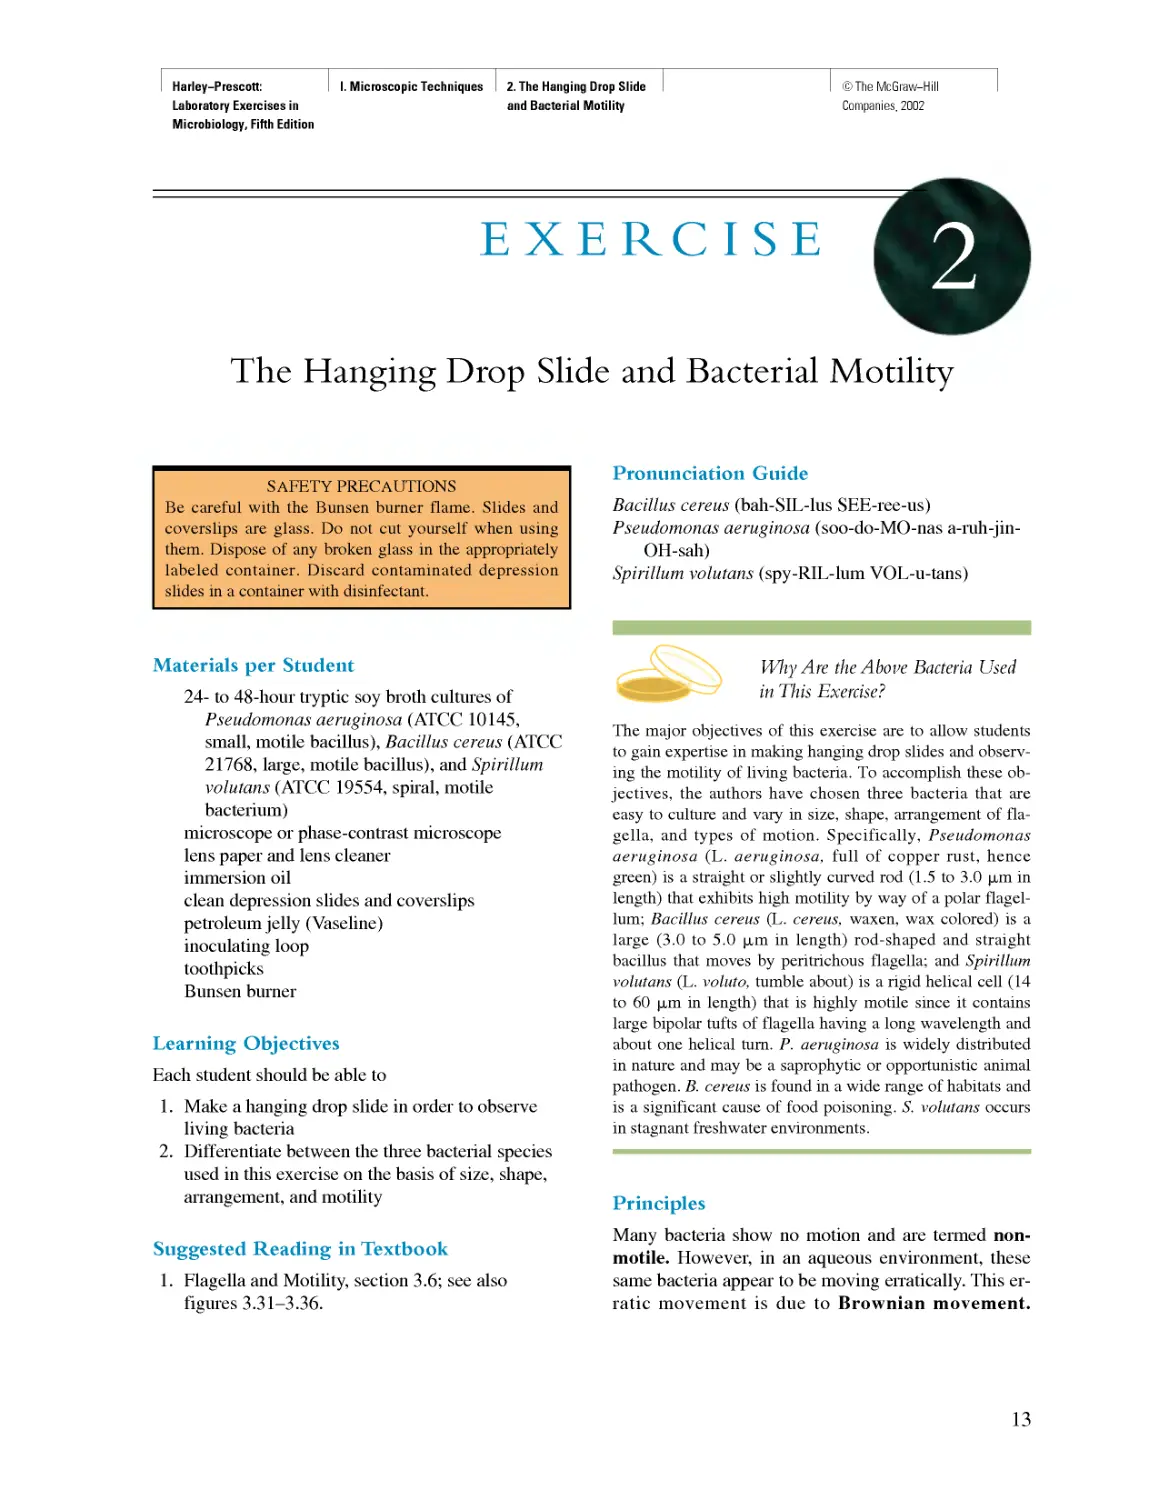 2. The Hanging Drop Slide and Bacterial Motility